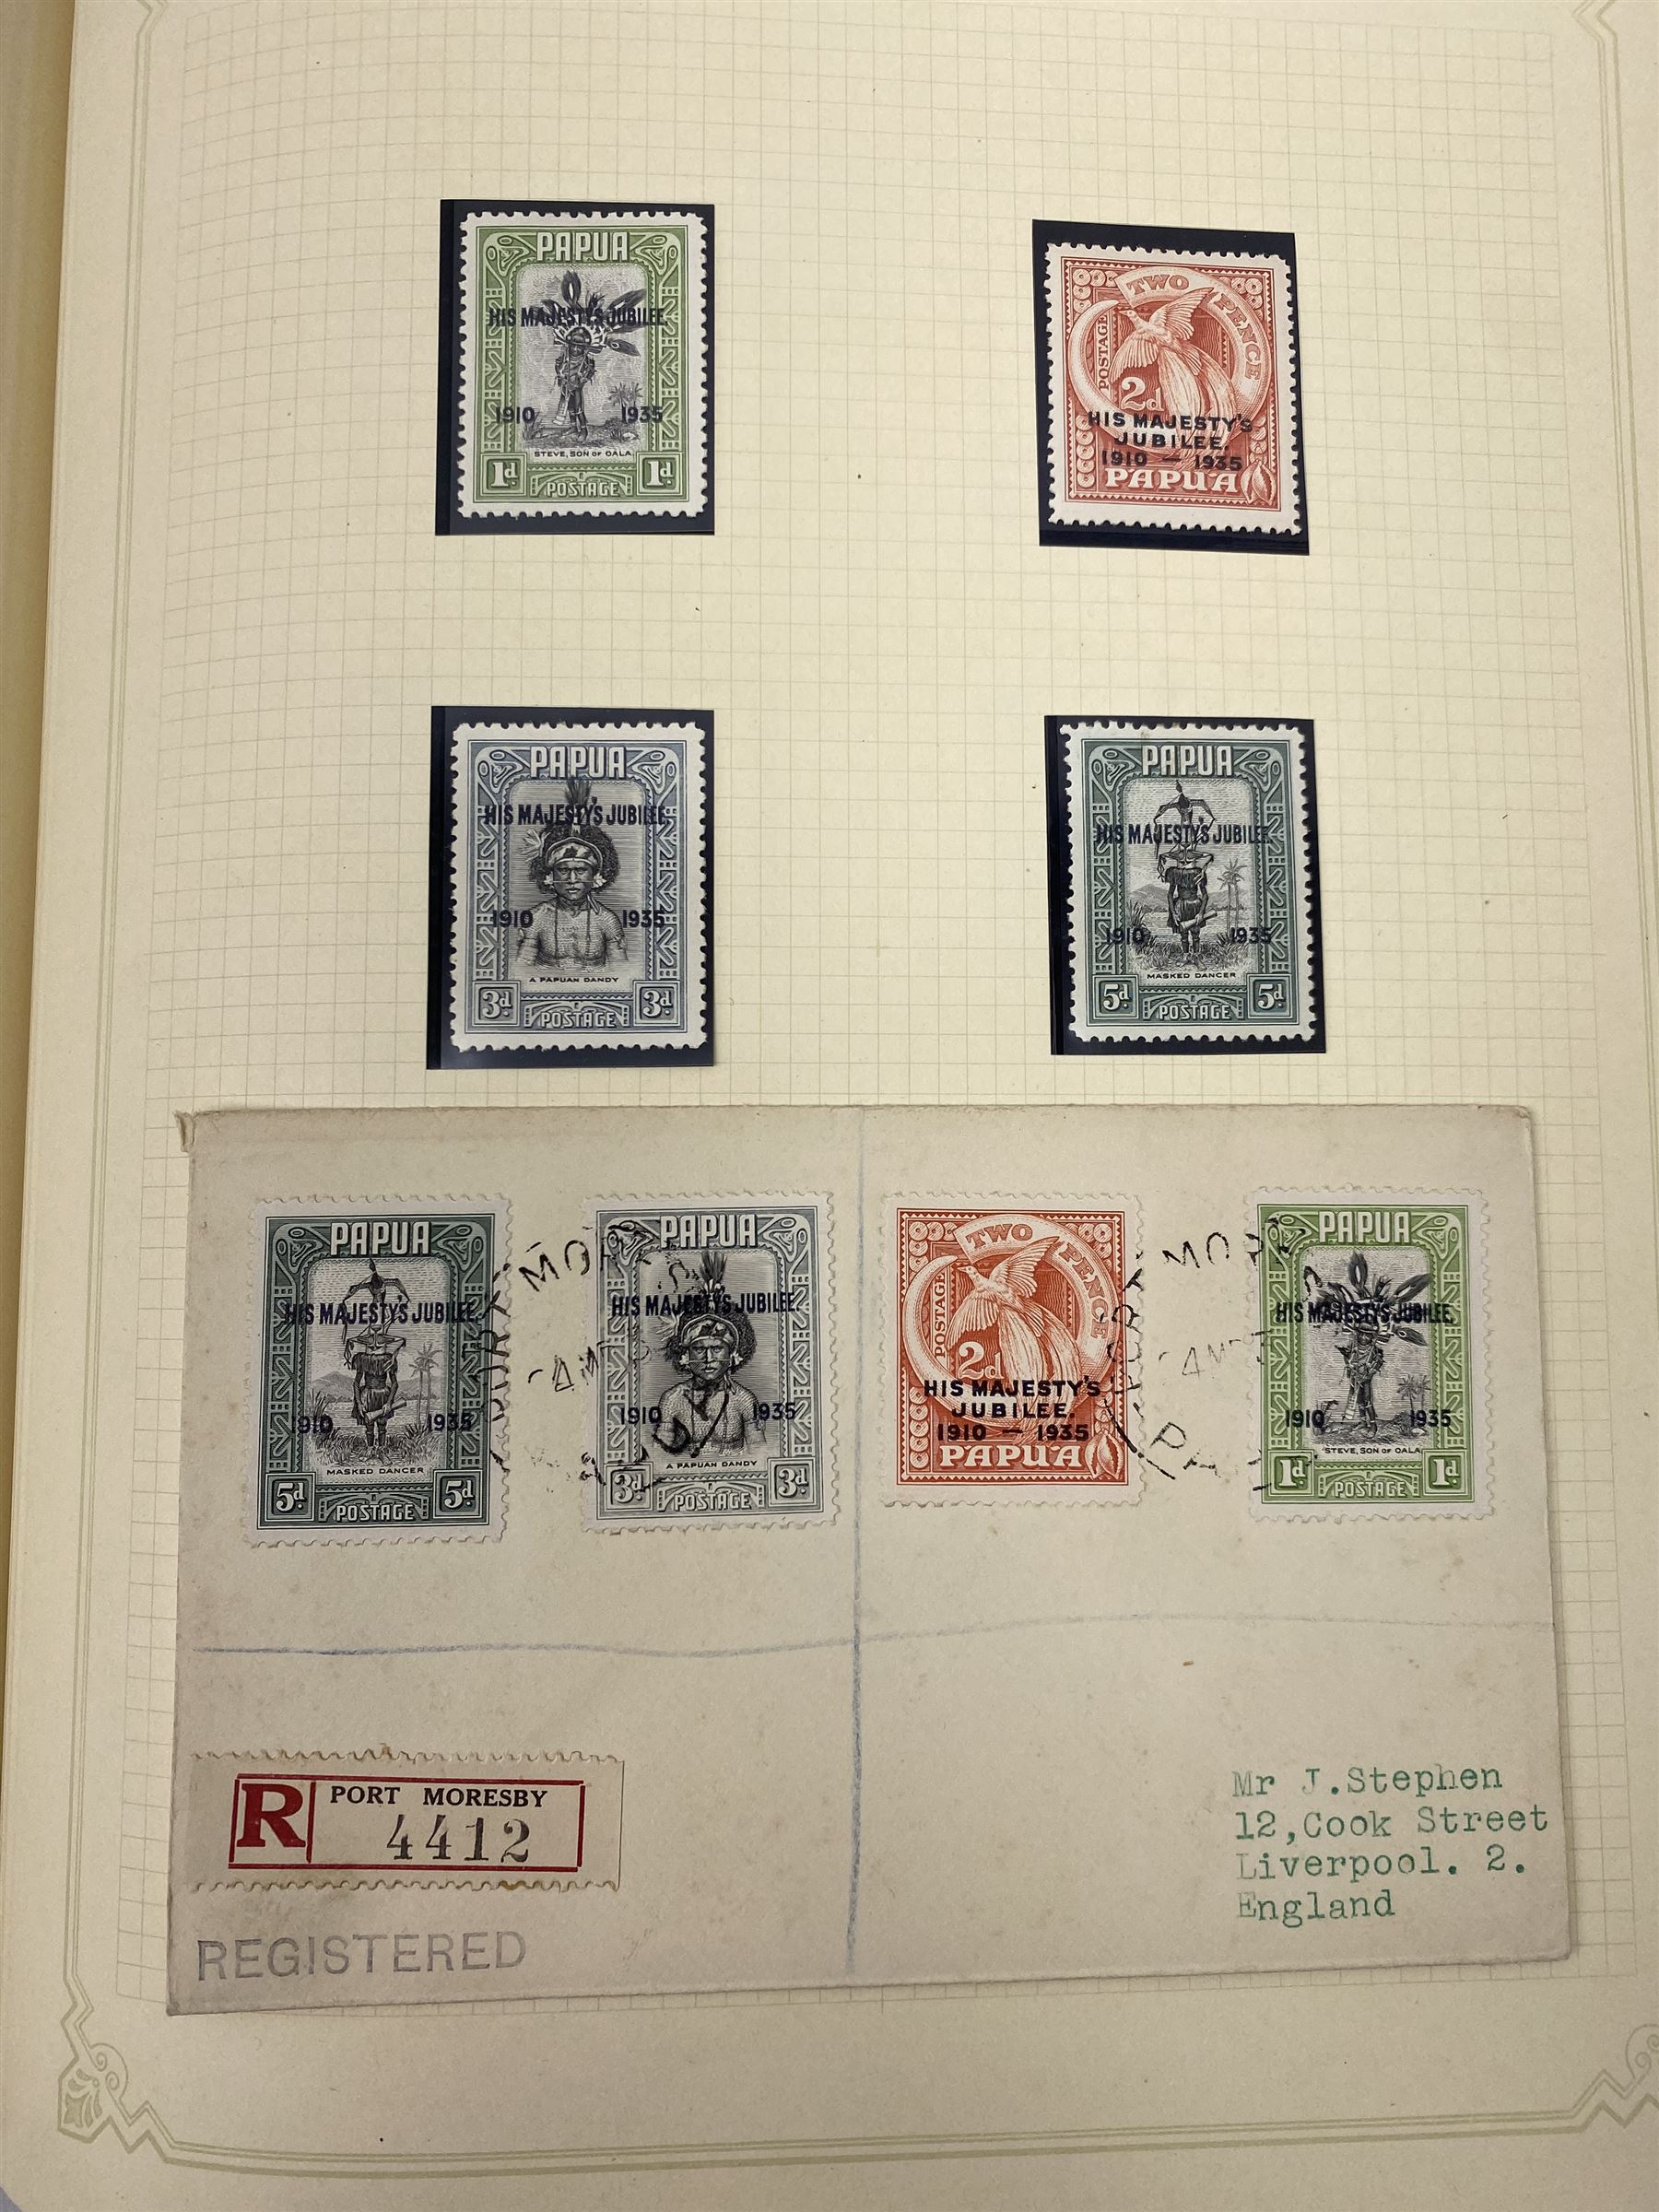 King George V 1935 Silver Jubilee stamps - Image 15 of 17